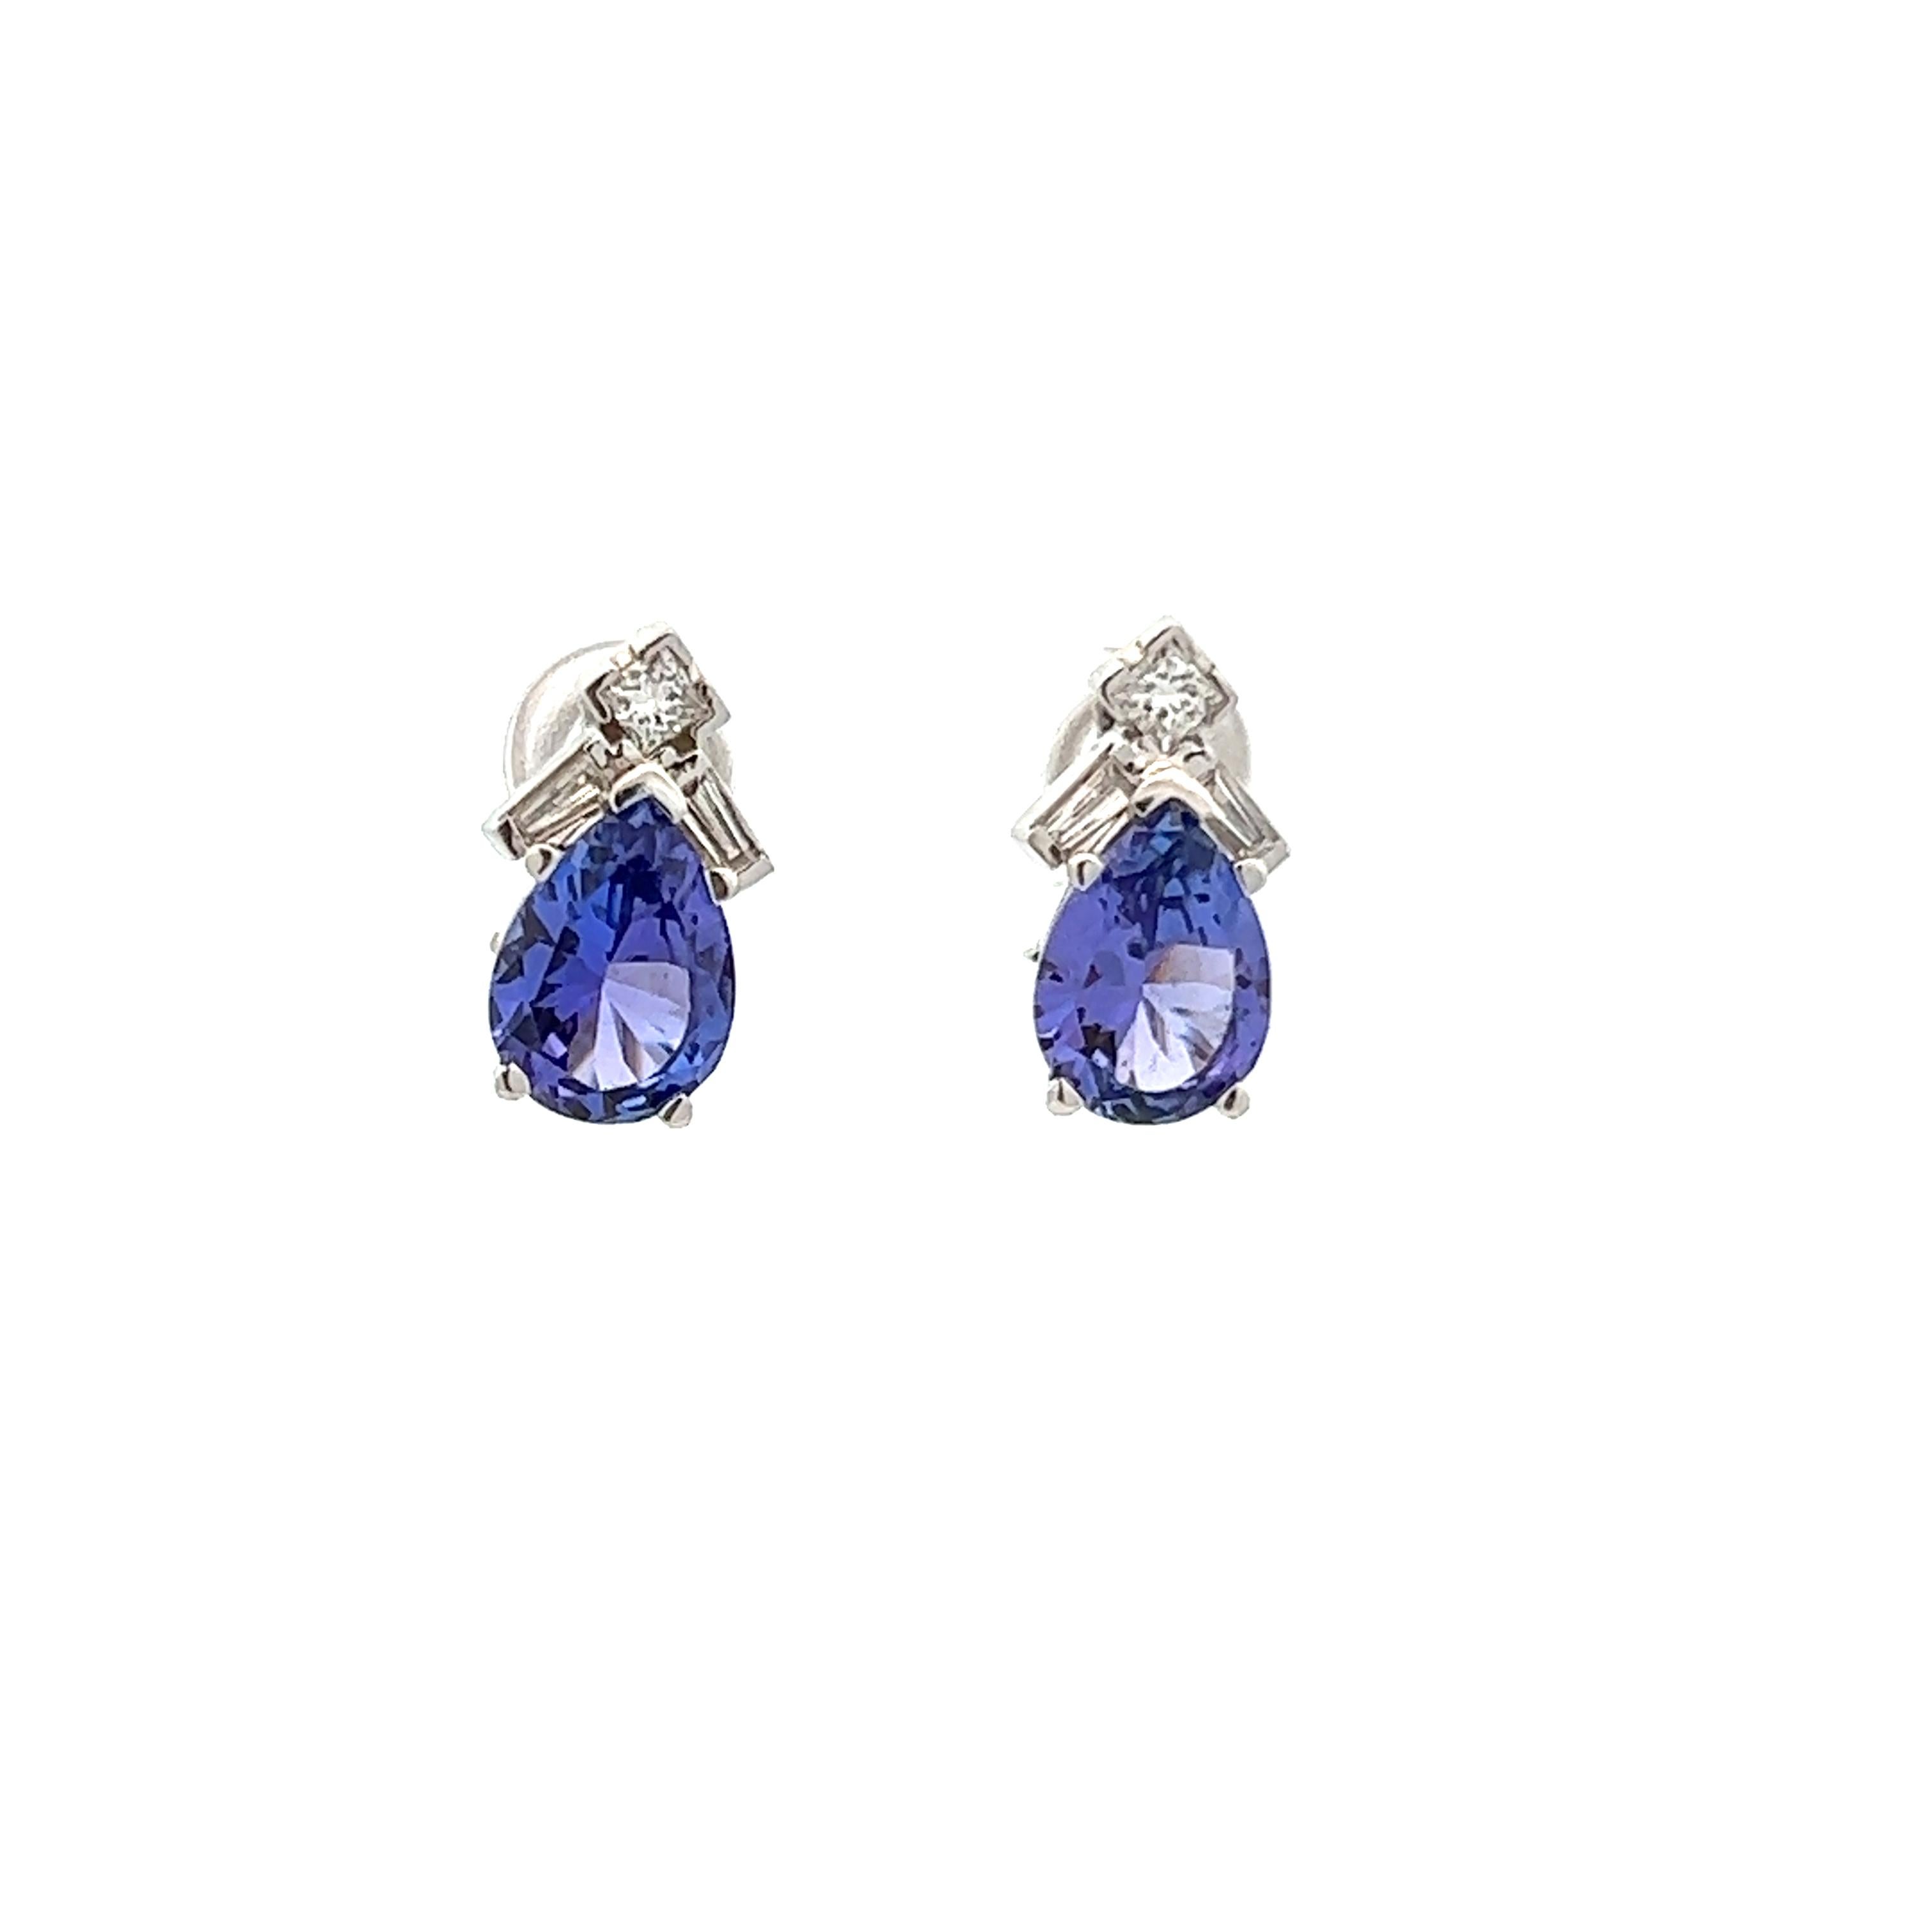 This lovely pair of contemporary earrings, made in 14k white gold, have both tanzanite and diamond. These earrings contain 1.00 cttw G color, SI1 clarity diamonds as well as 4.50 cttw of pear cut tanzanite. THe combination of of tanzanite, white